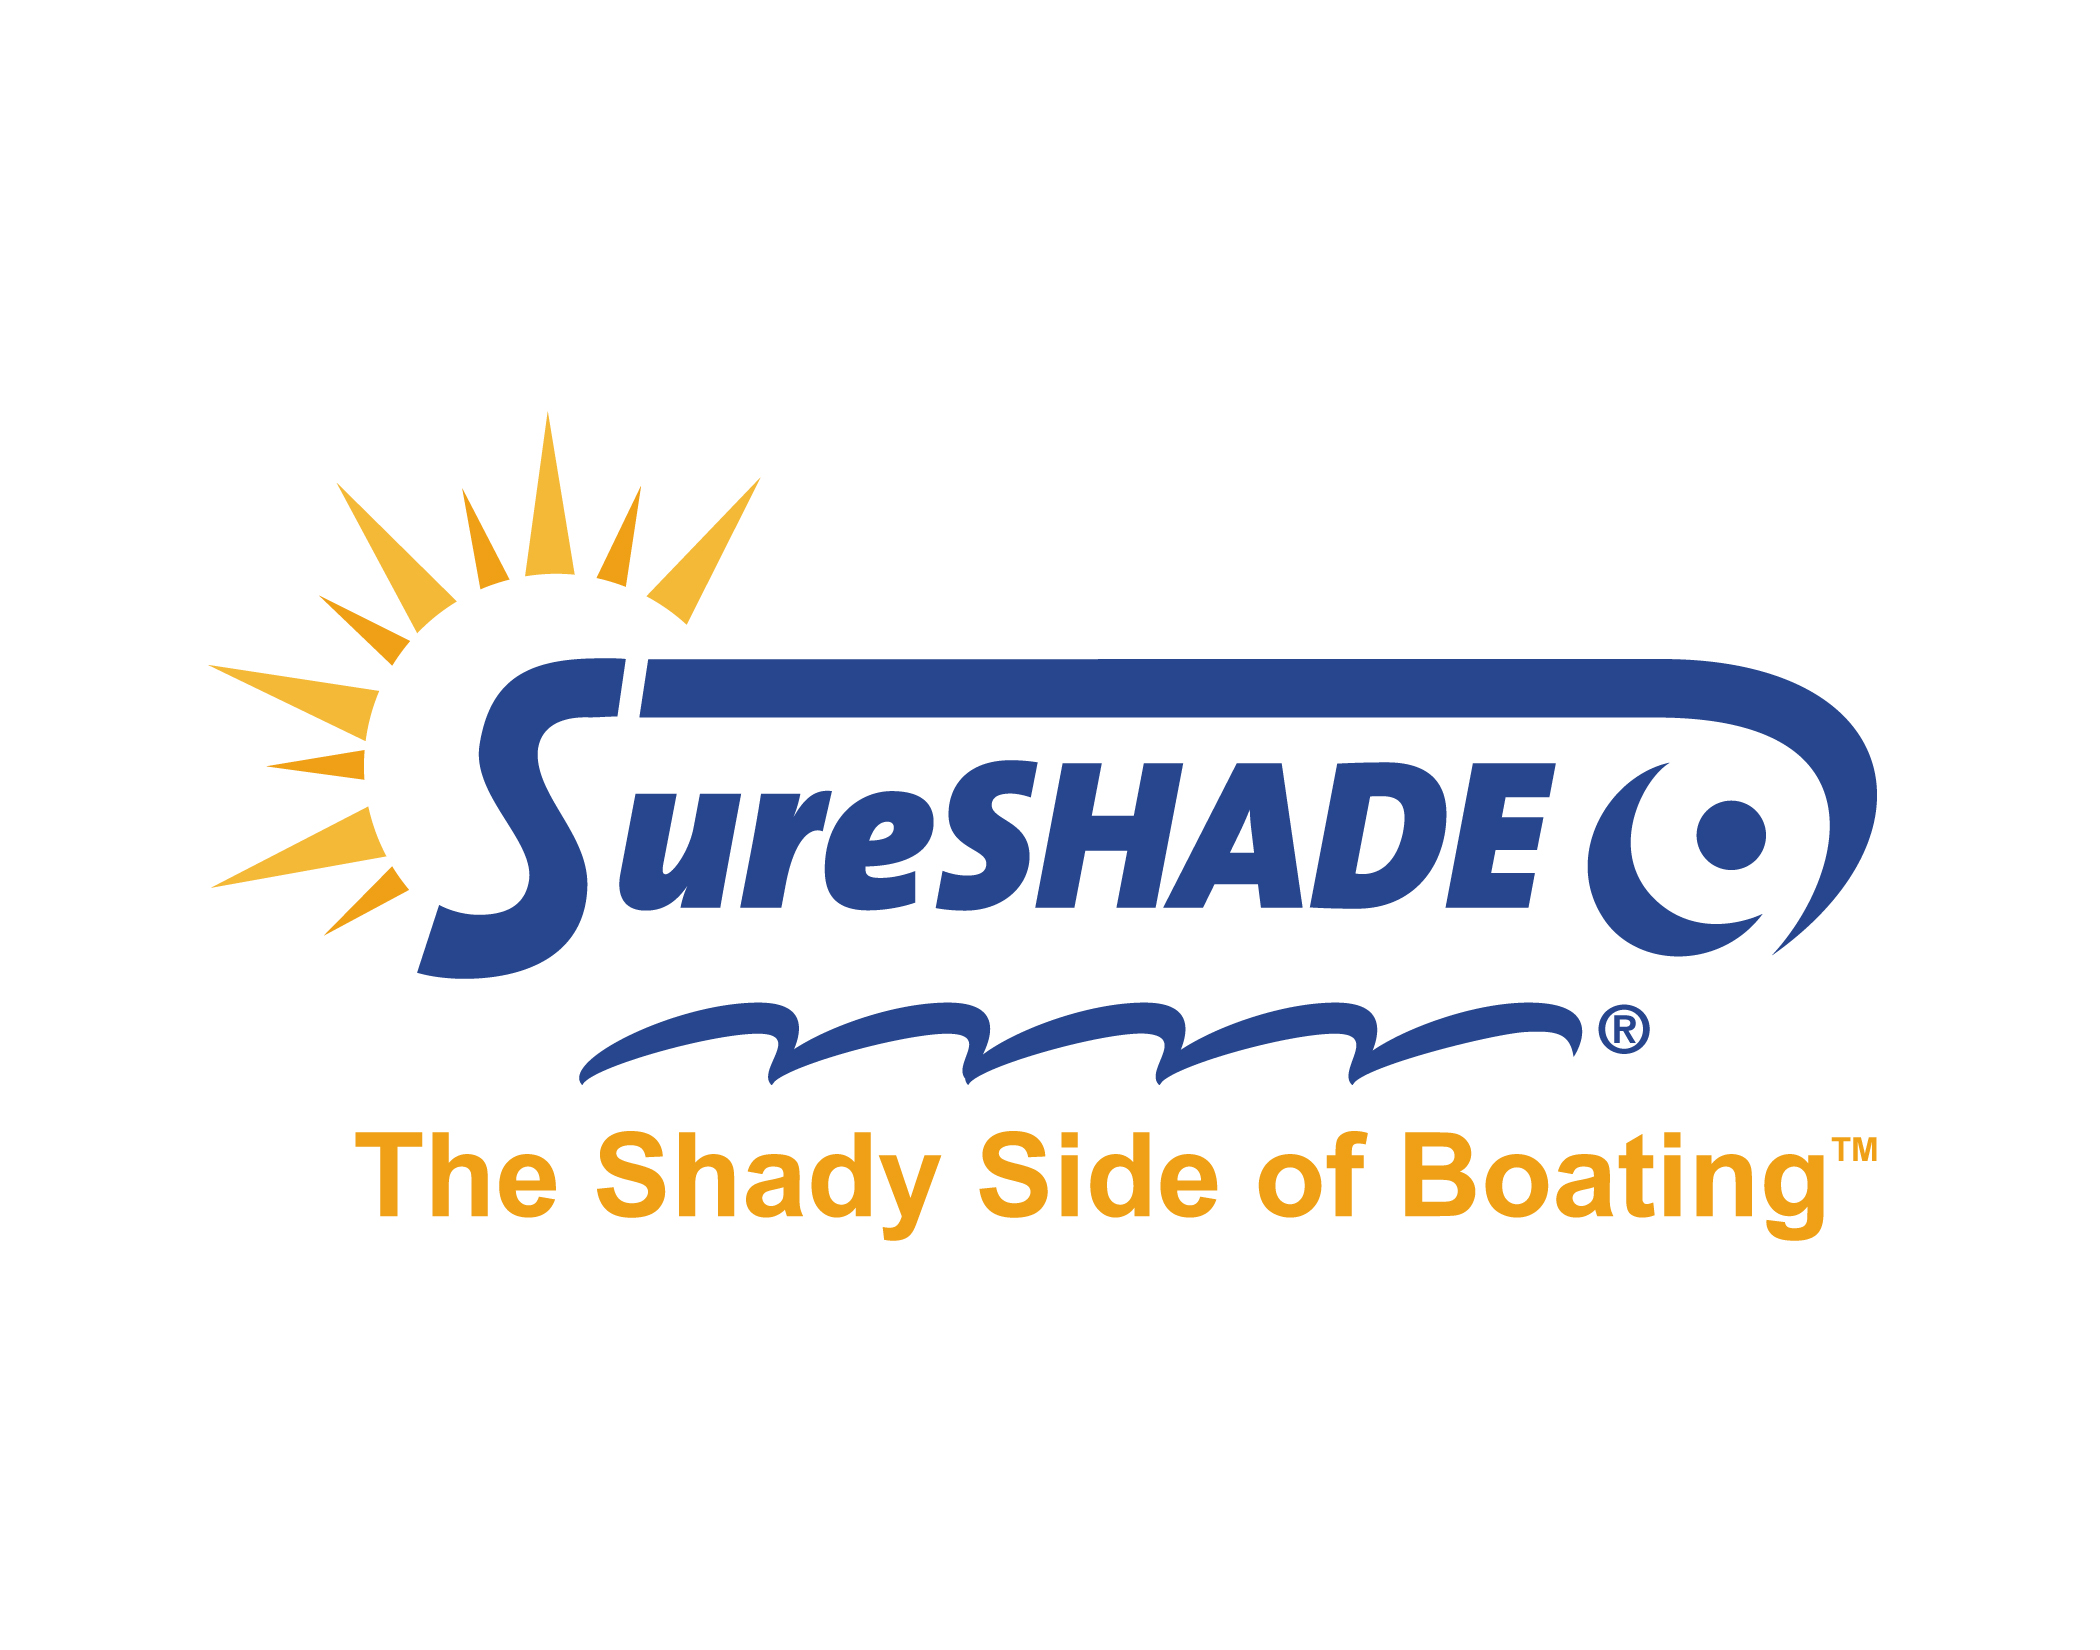 SureShade has more than doubled sales for its marine sunshade systems in the first half of 2014.